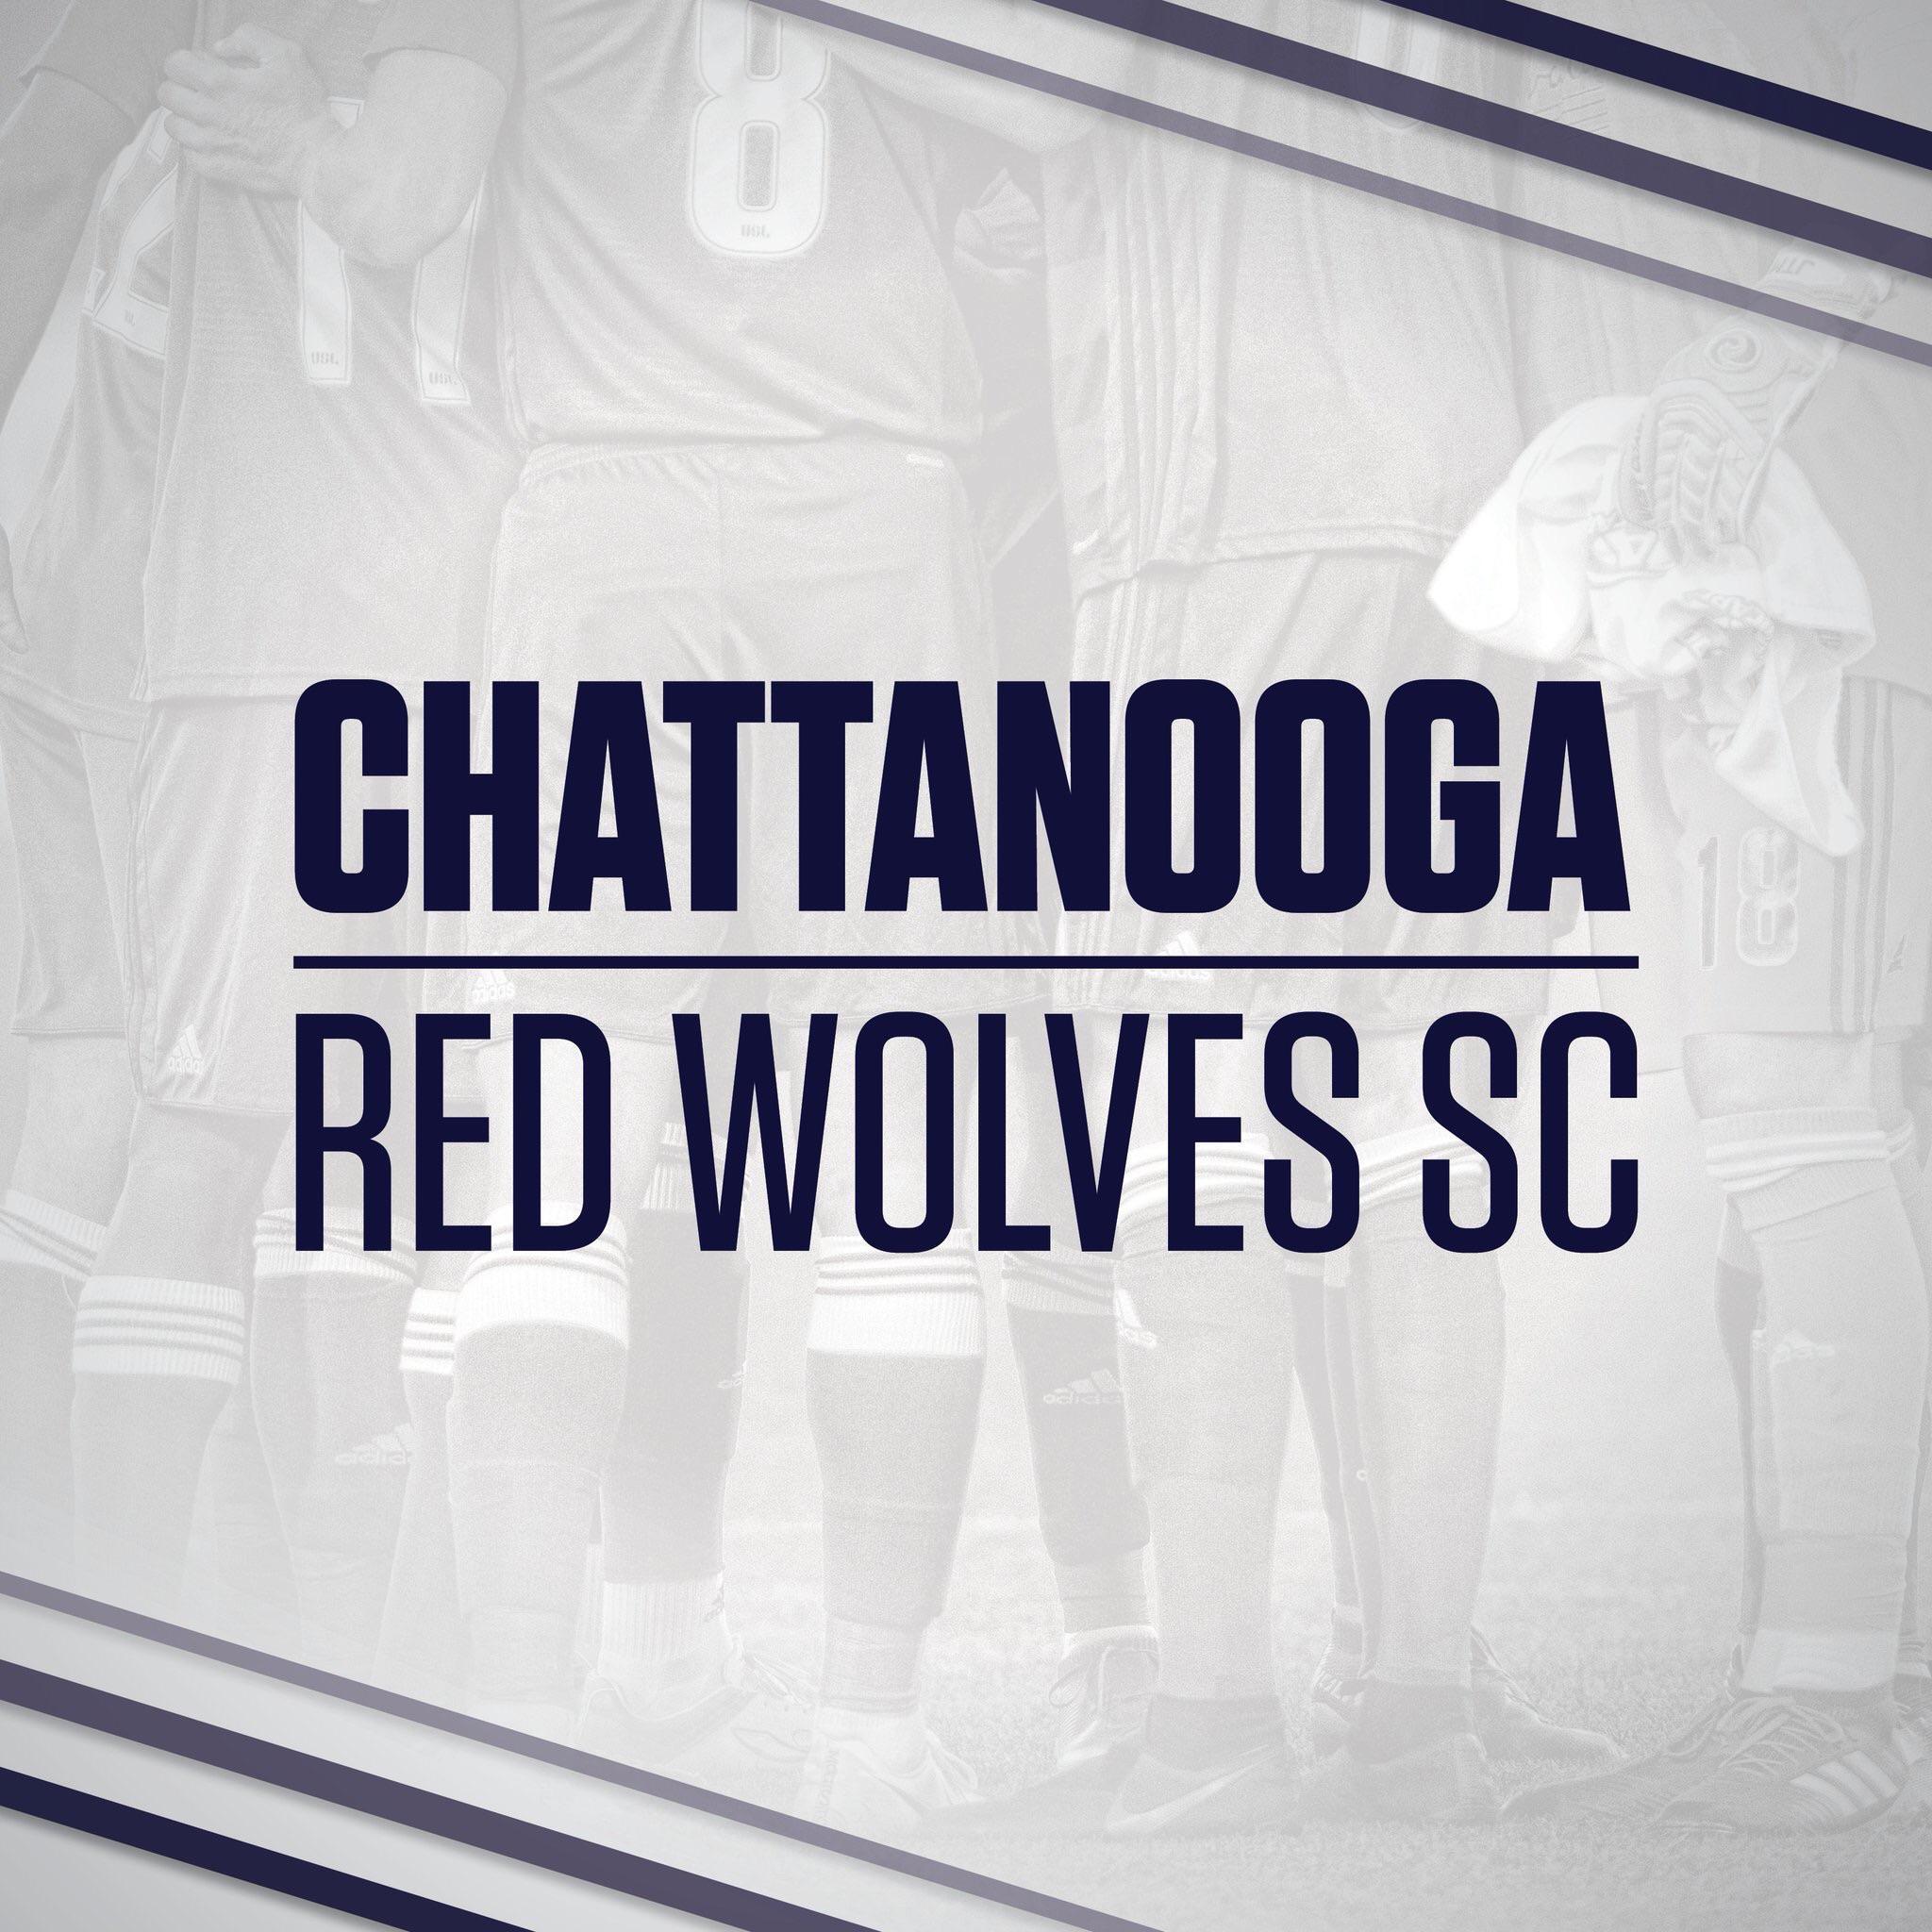 Red Wolf Soccer Logo - Chattanooga Red Wolves SC Your official pro soccer club name is